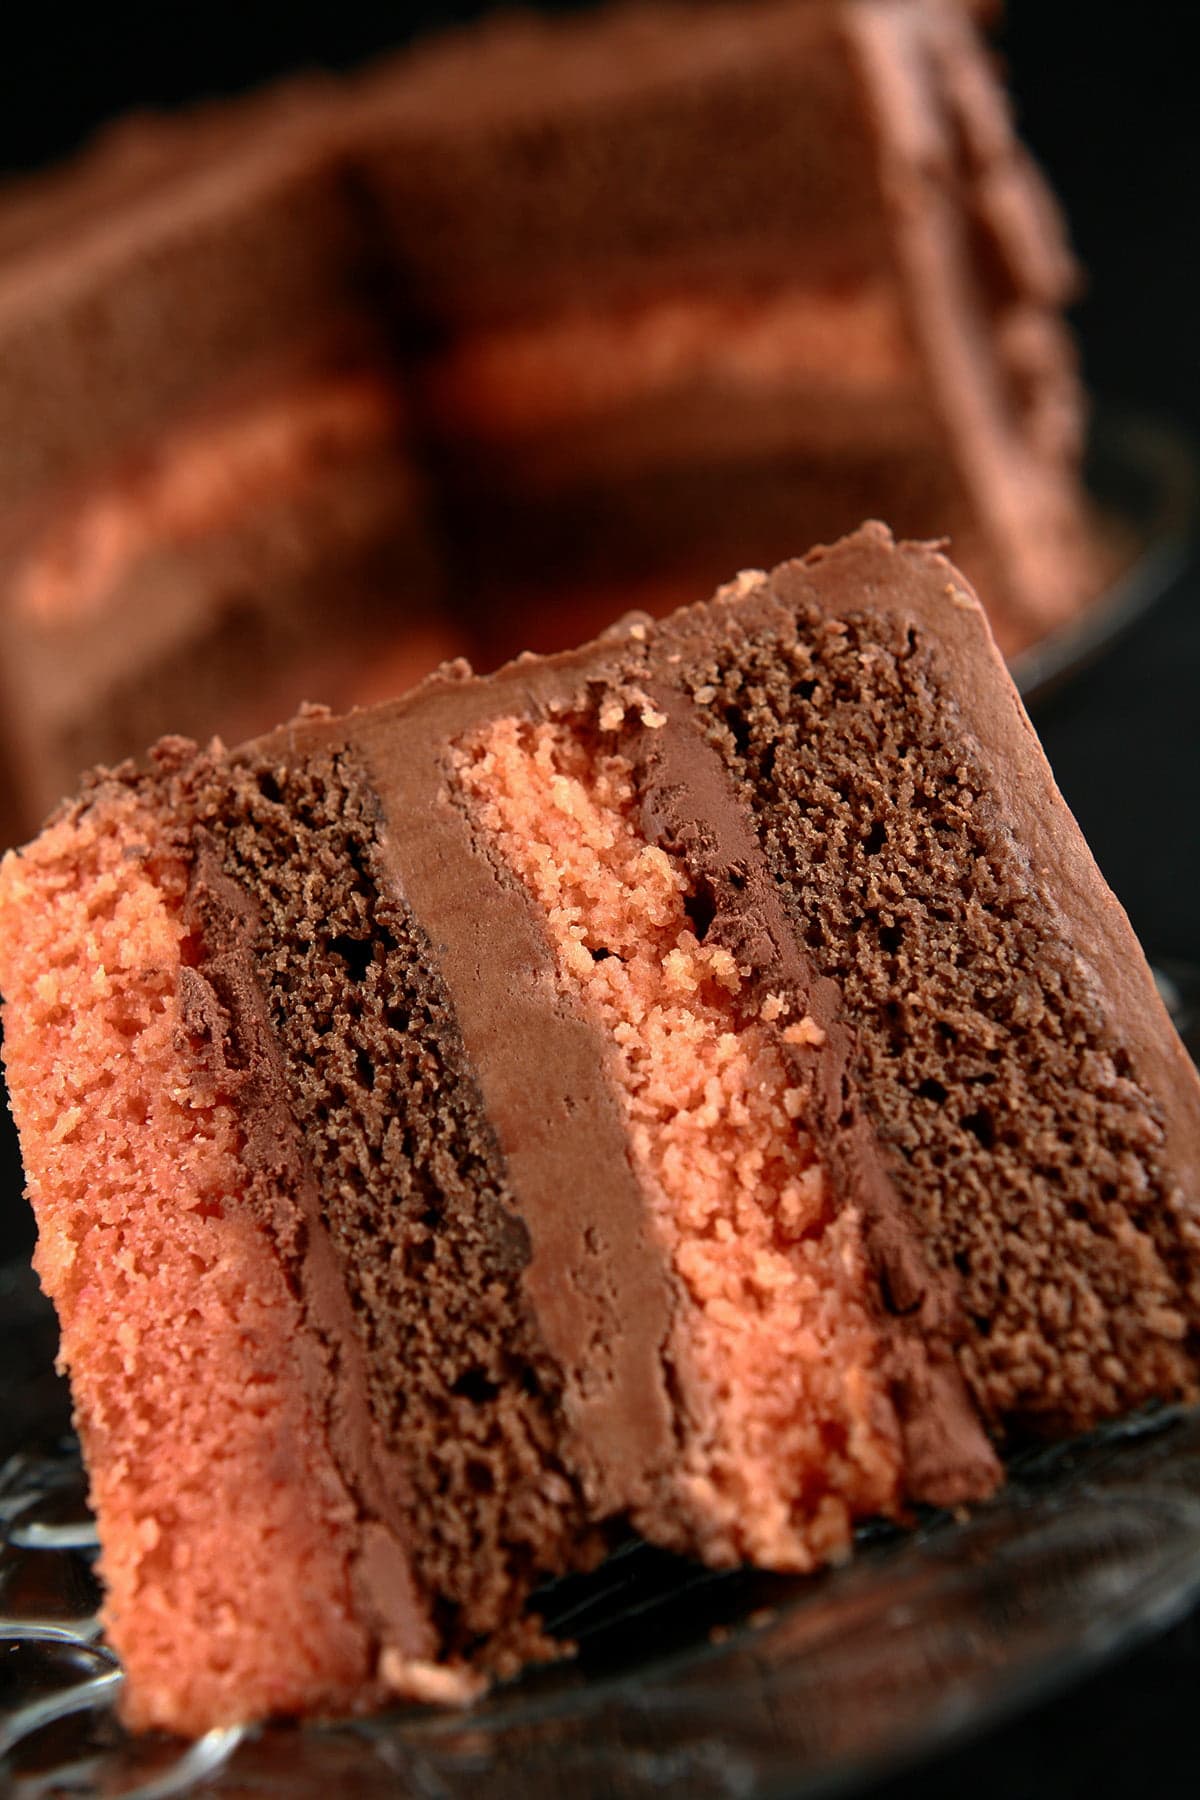 A large slice of B-52 Cake is shown in front of a round, whole cake with a section cut out. The cake shows layers of mocha and orange cakes, separated by layers of blood orange ganache and Irish Cream buttercream.